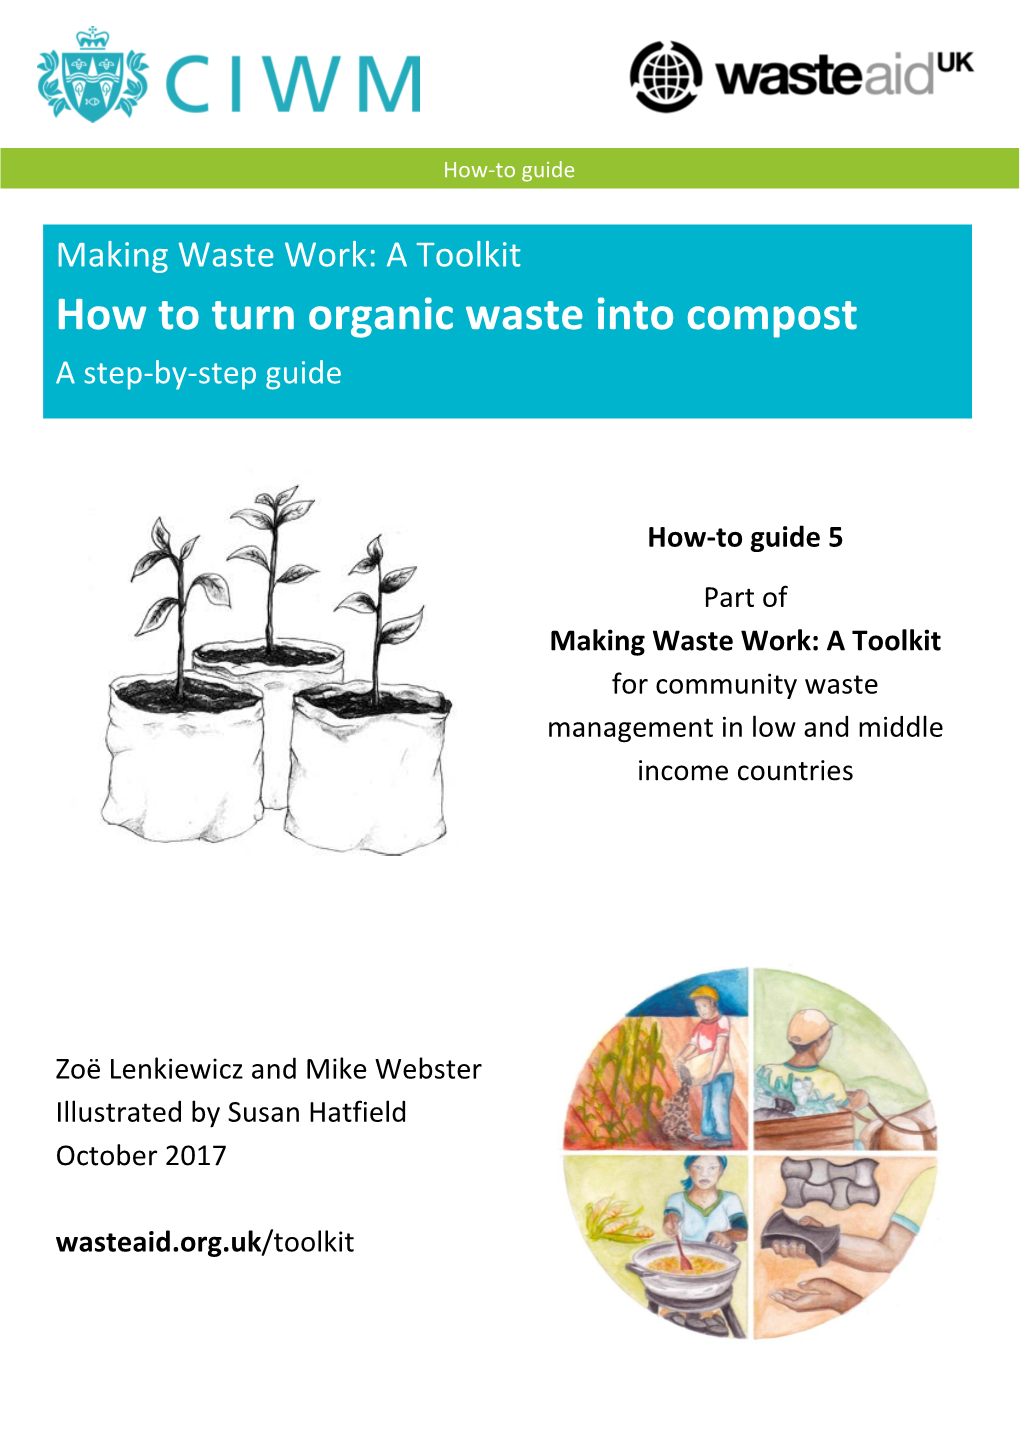 How to Turn Organic Waste Into Compost a Step-By-Step Guide